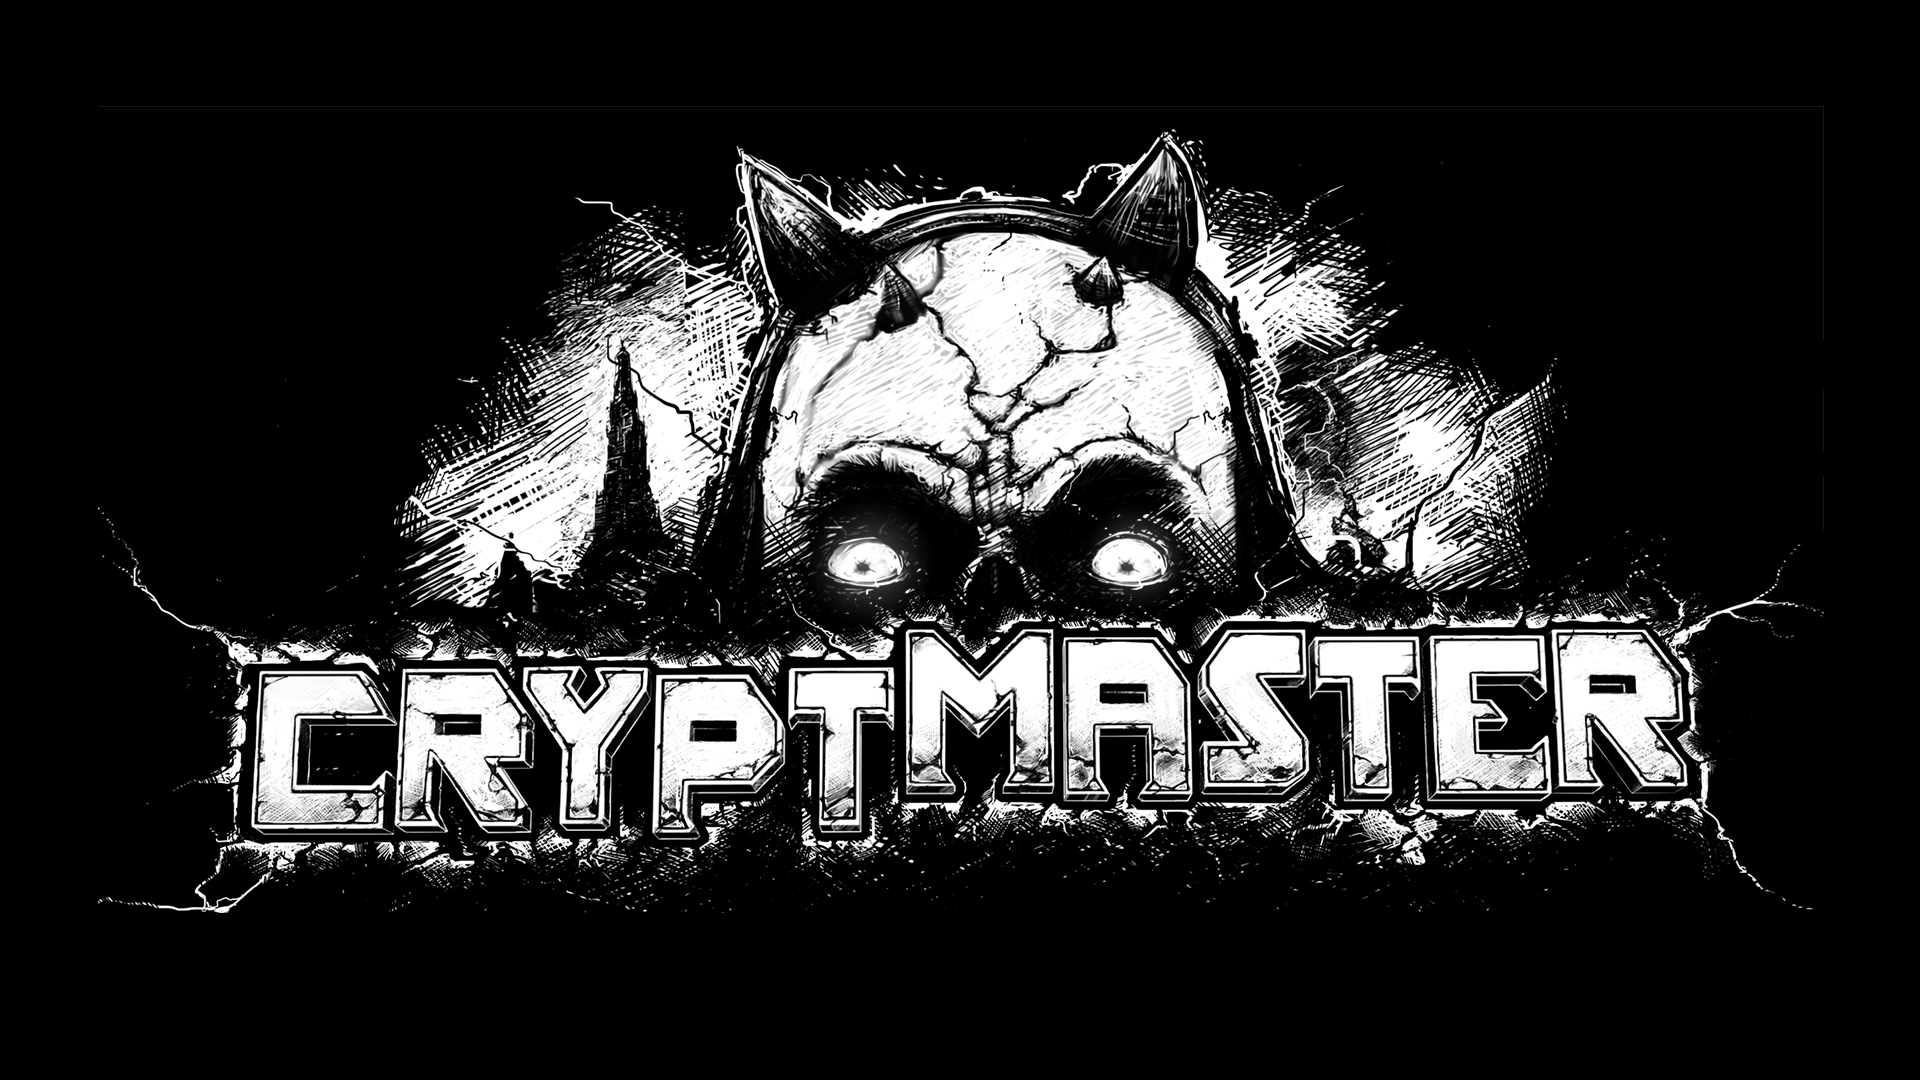 The key art for Cryptmaster.